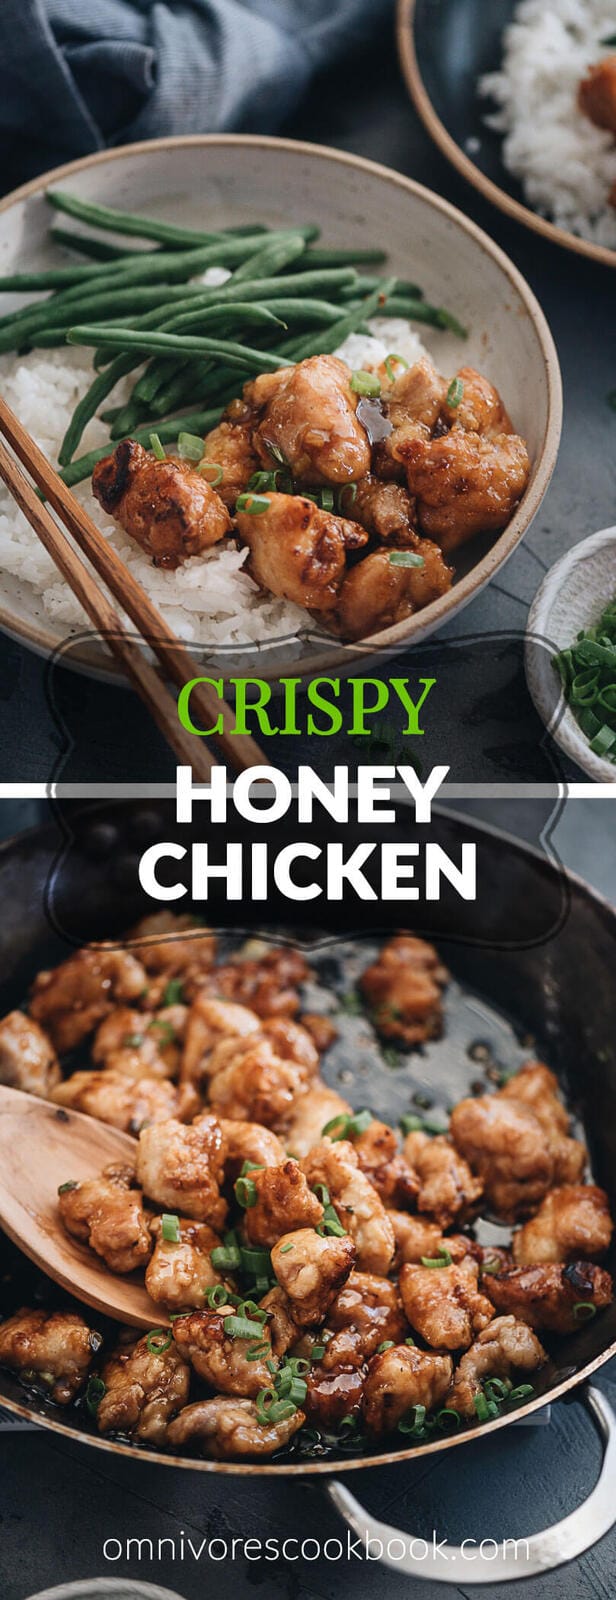 Crispy Chinese Honey Chicken (without Deep Frying) - This easier, healthier version guarantees crispy juicy chicken and a rich sauce that is bursting with flavor. Now you can make your favorite takeout dish at home and it’ll taste just as great as the restaurant version! {Gluten Free Adaptable}